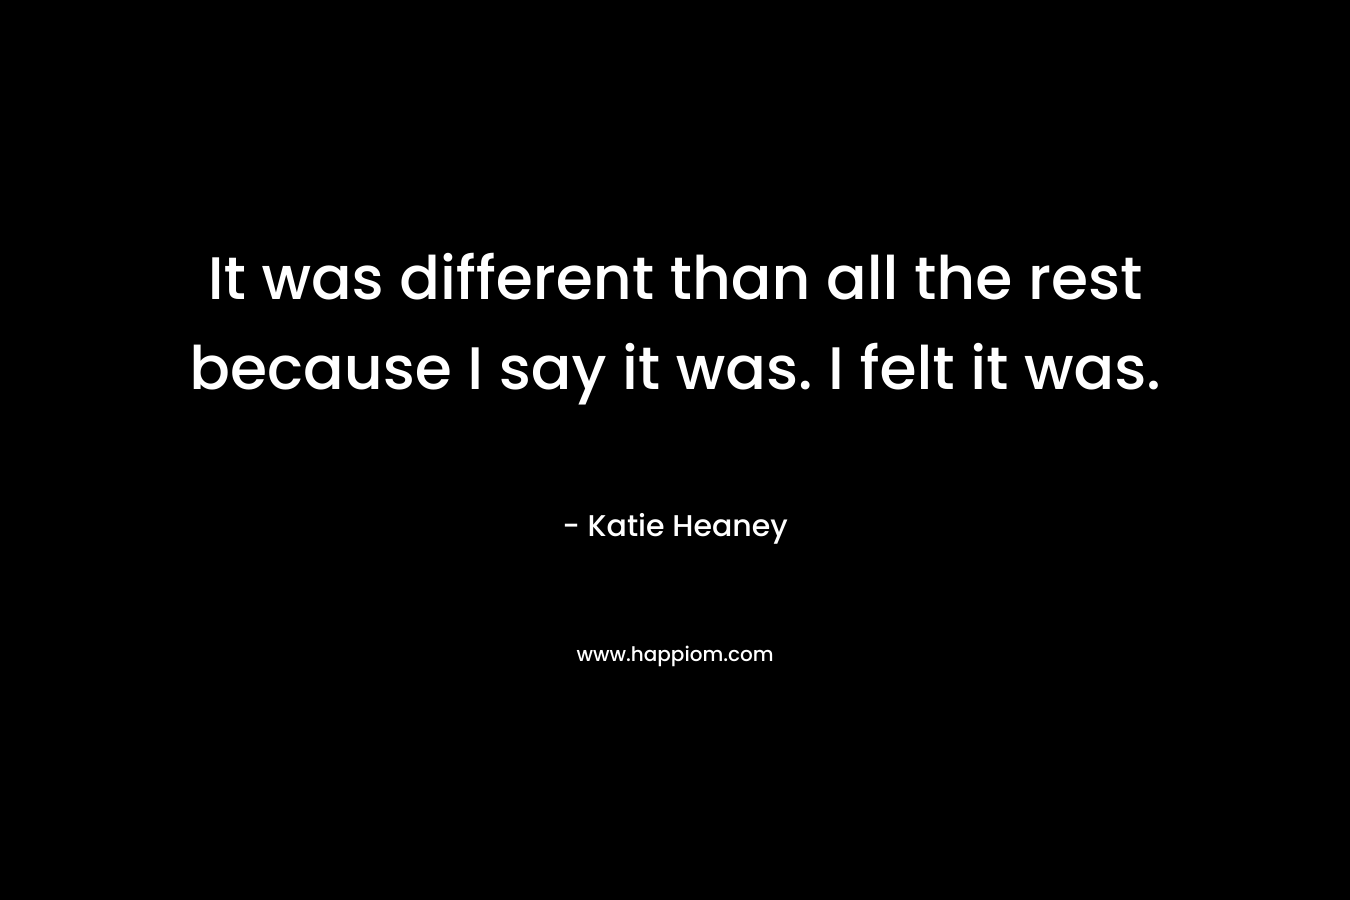 It was different than all the rest because I say it was. I felt it was. – Katie Heaney